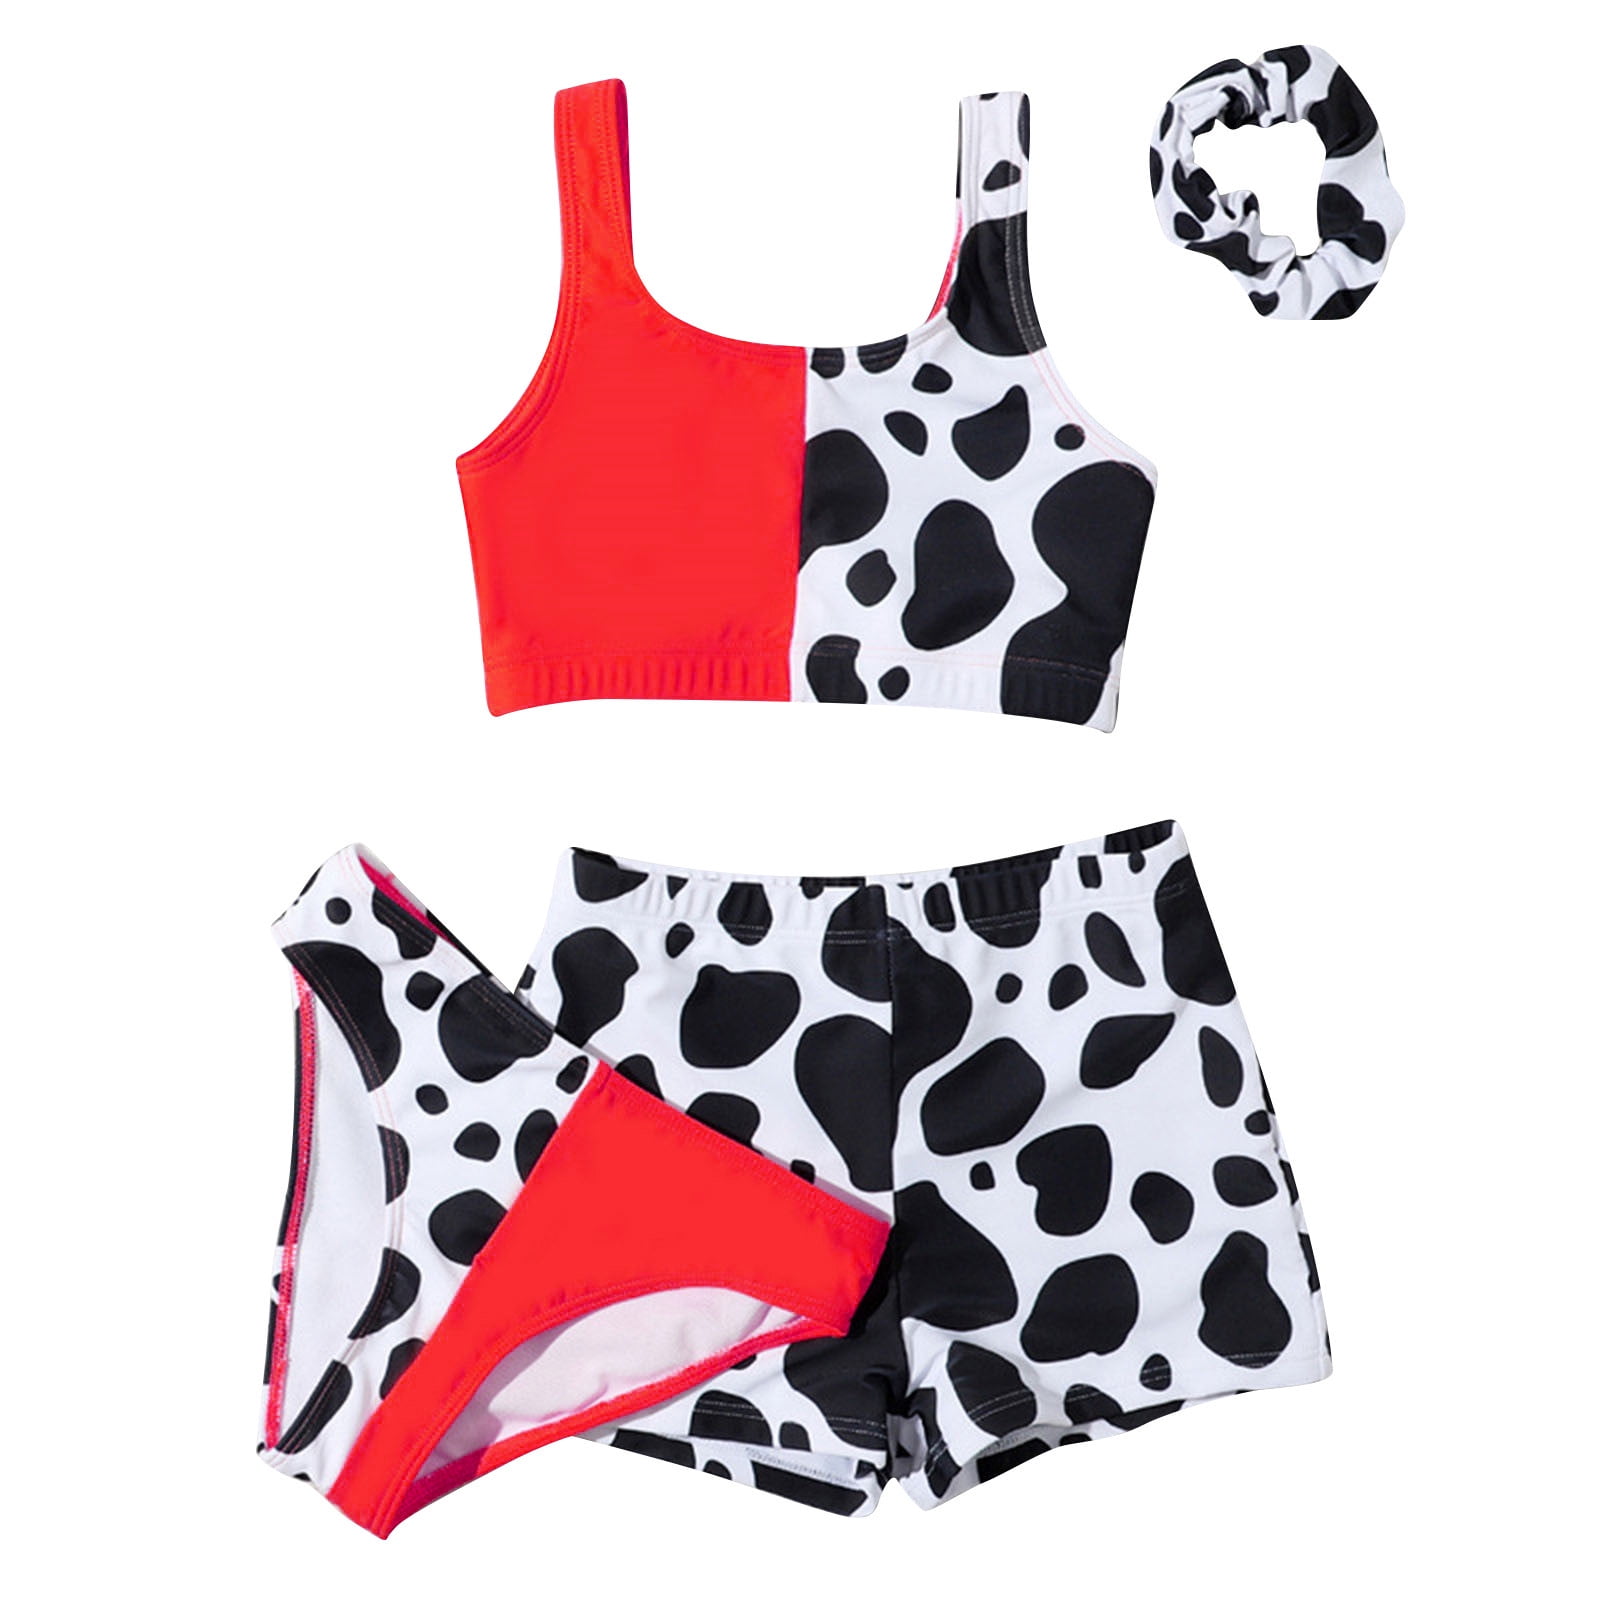 Toddler Swimsuit Girl 2 Piece Size 140 For 8 Years-10 Years 4 Piece Cow ...